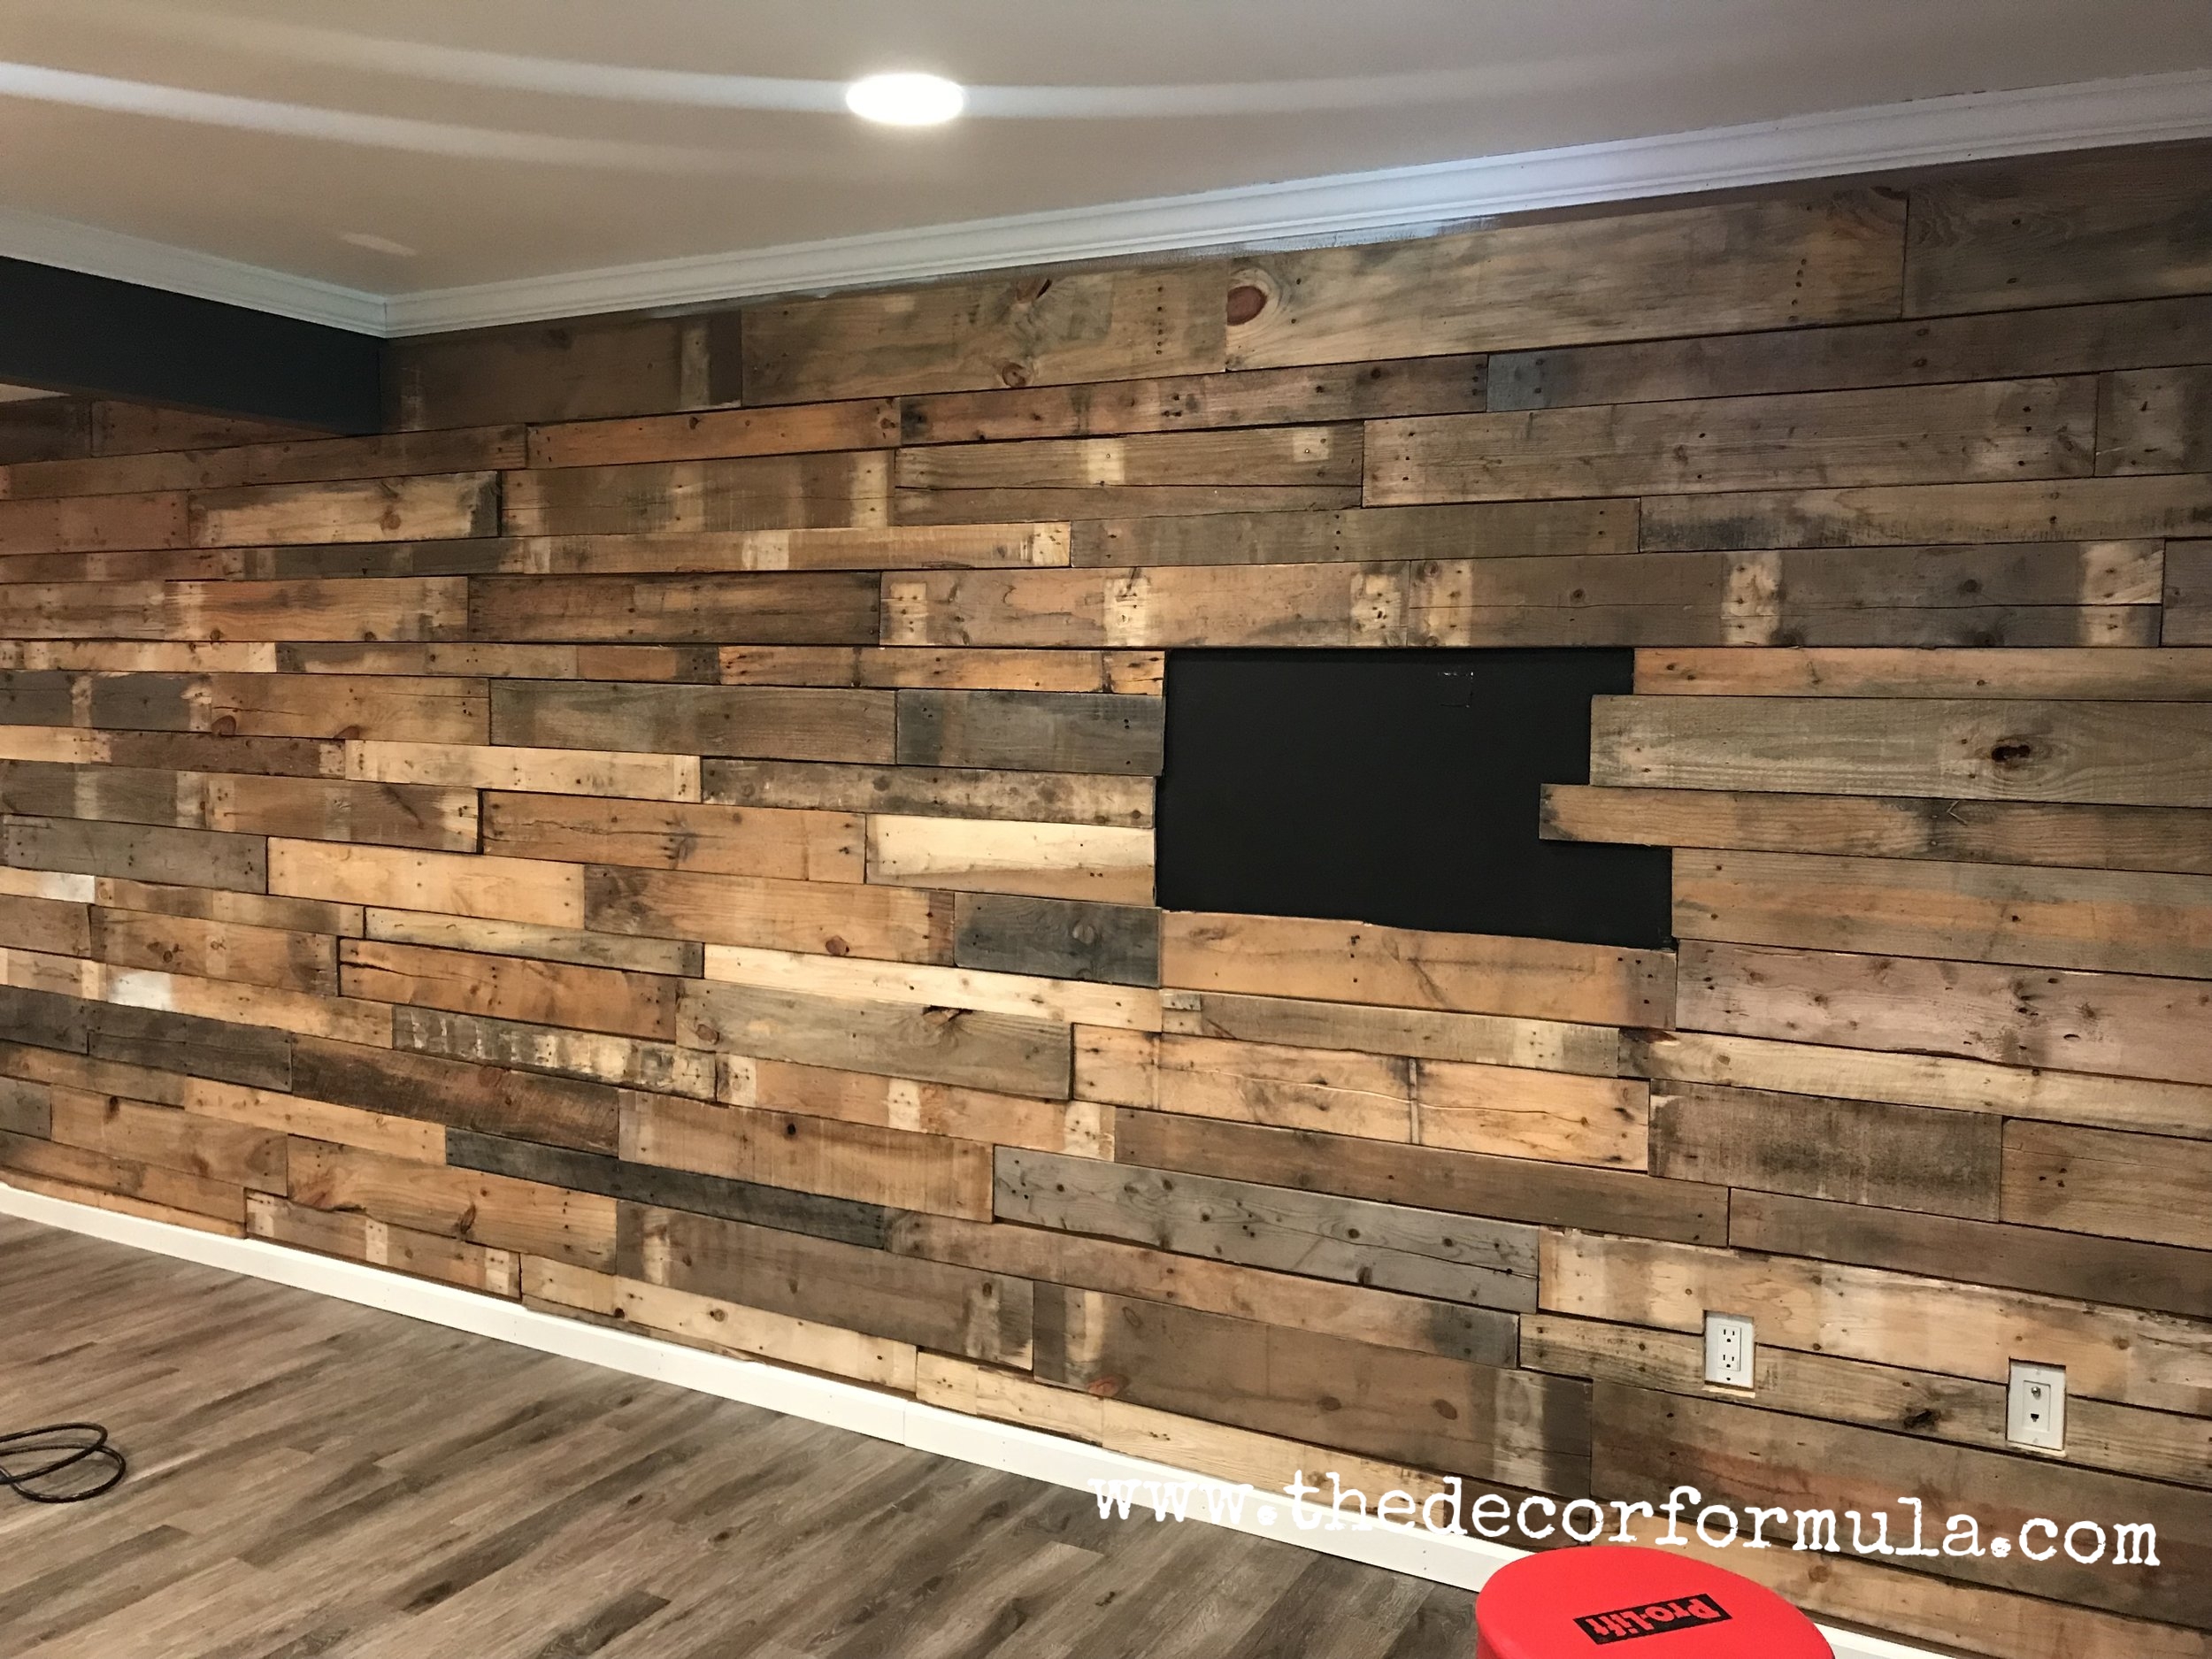 Small Pallet Wall Art Ideas chicago 2021